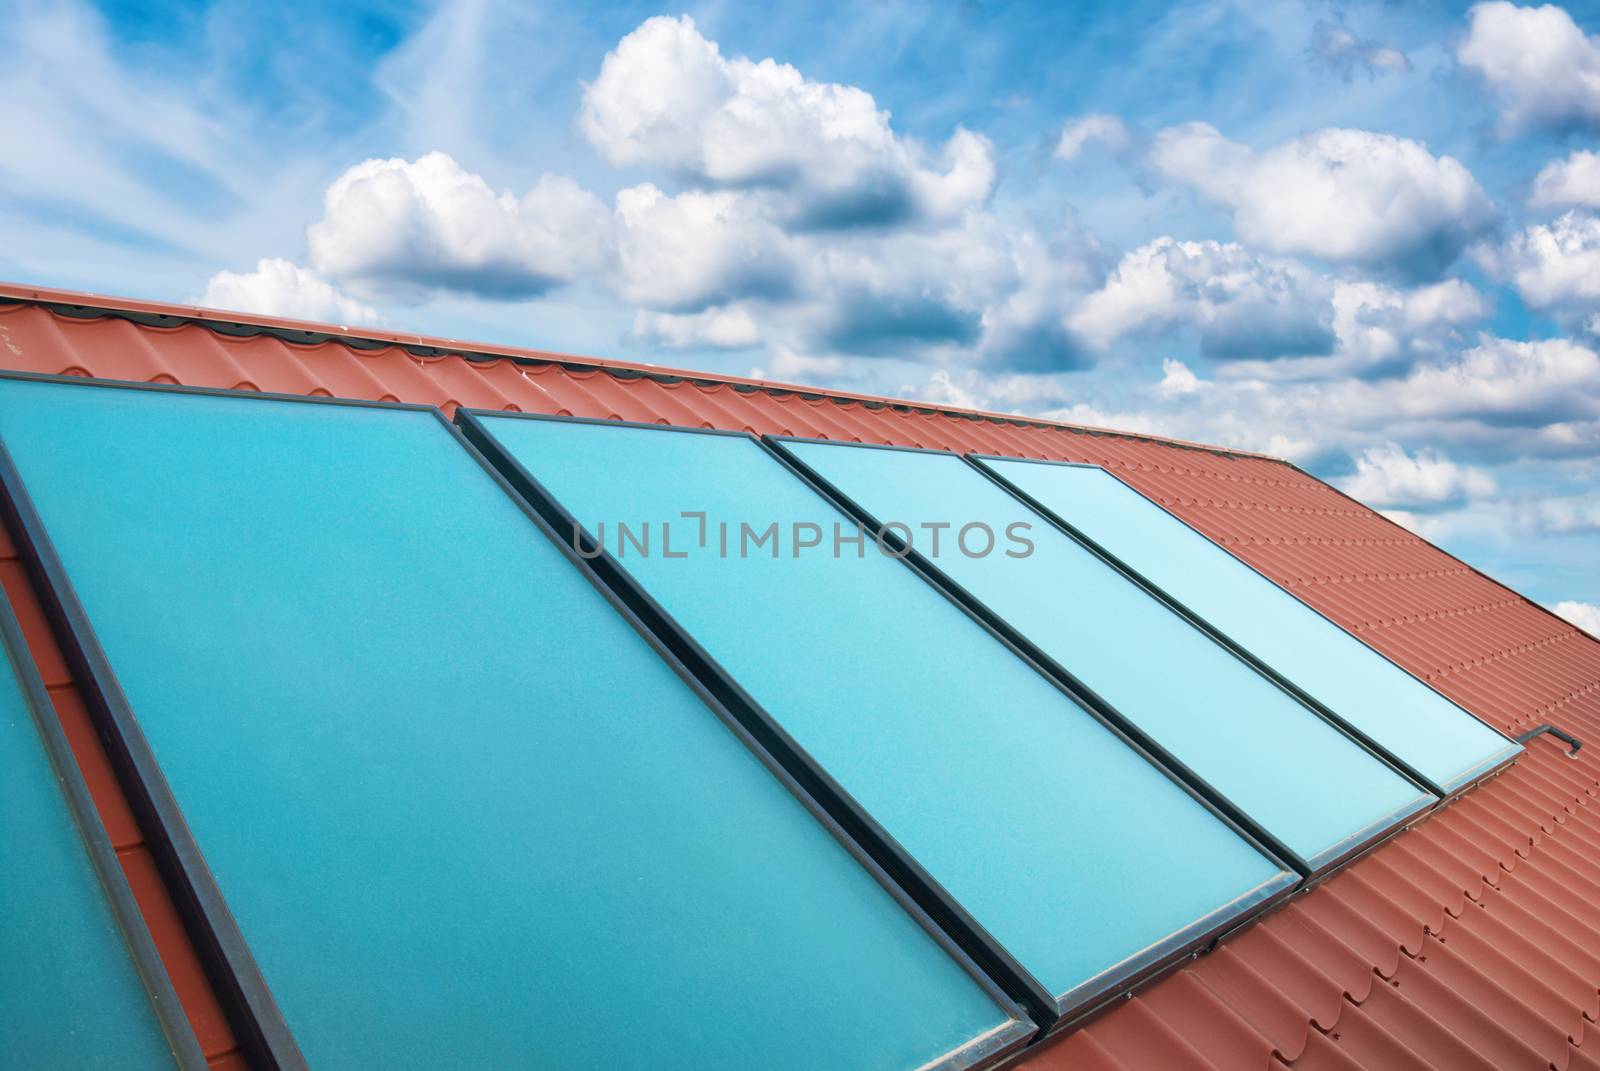 Solar cells on the red house roof by vapi